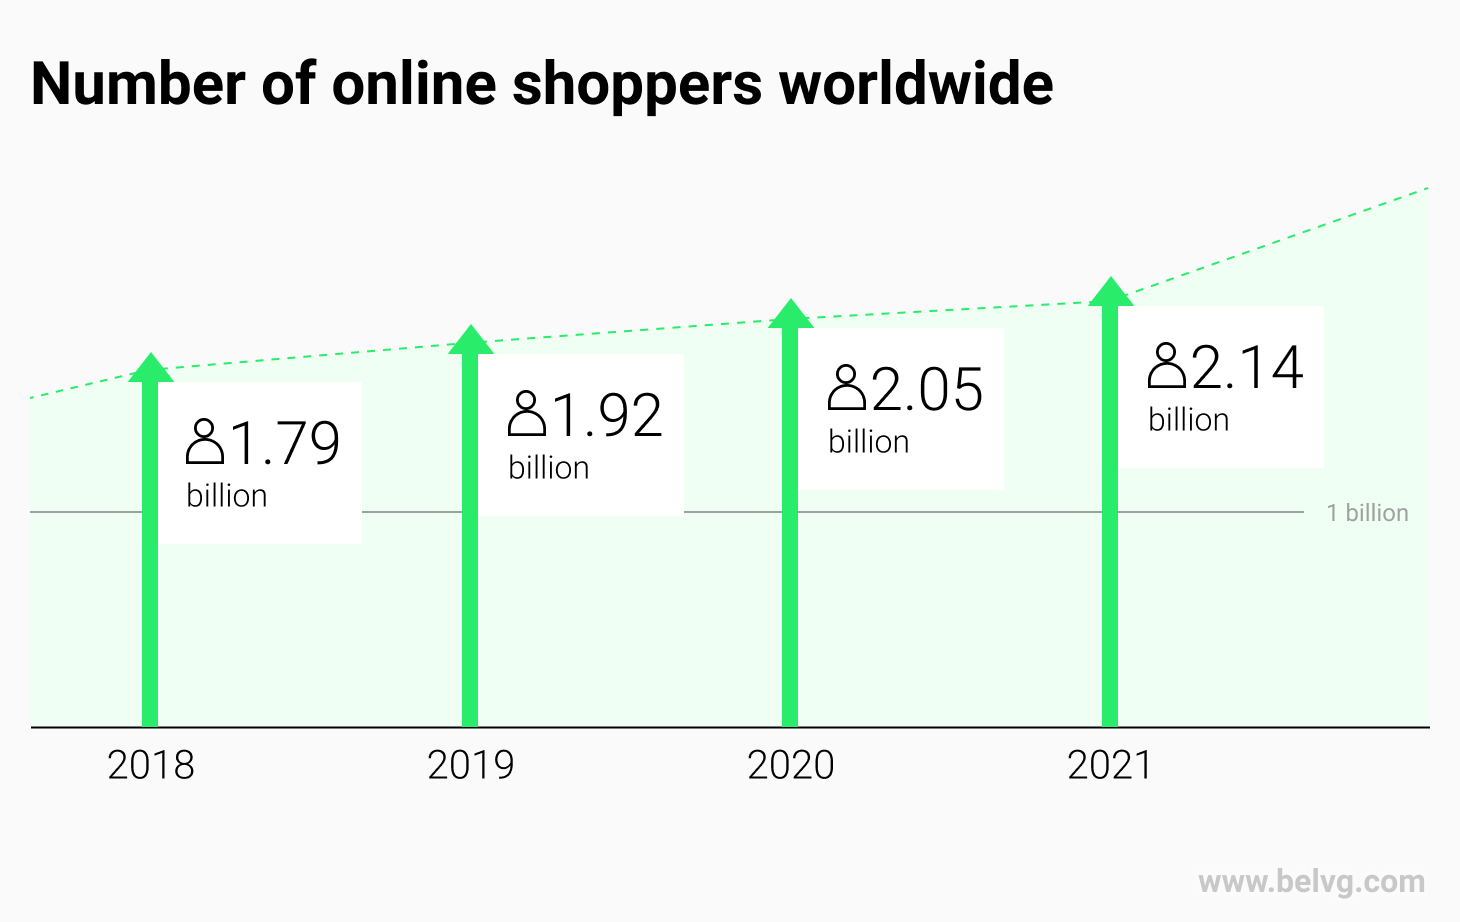 Number of online shoppers worldwide